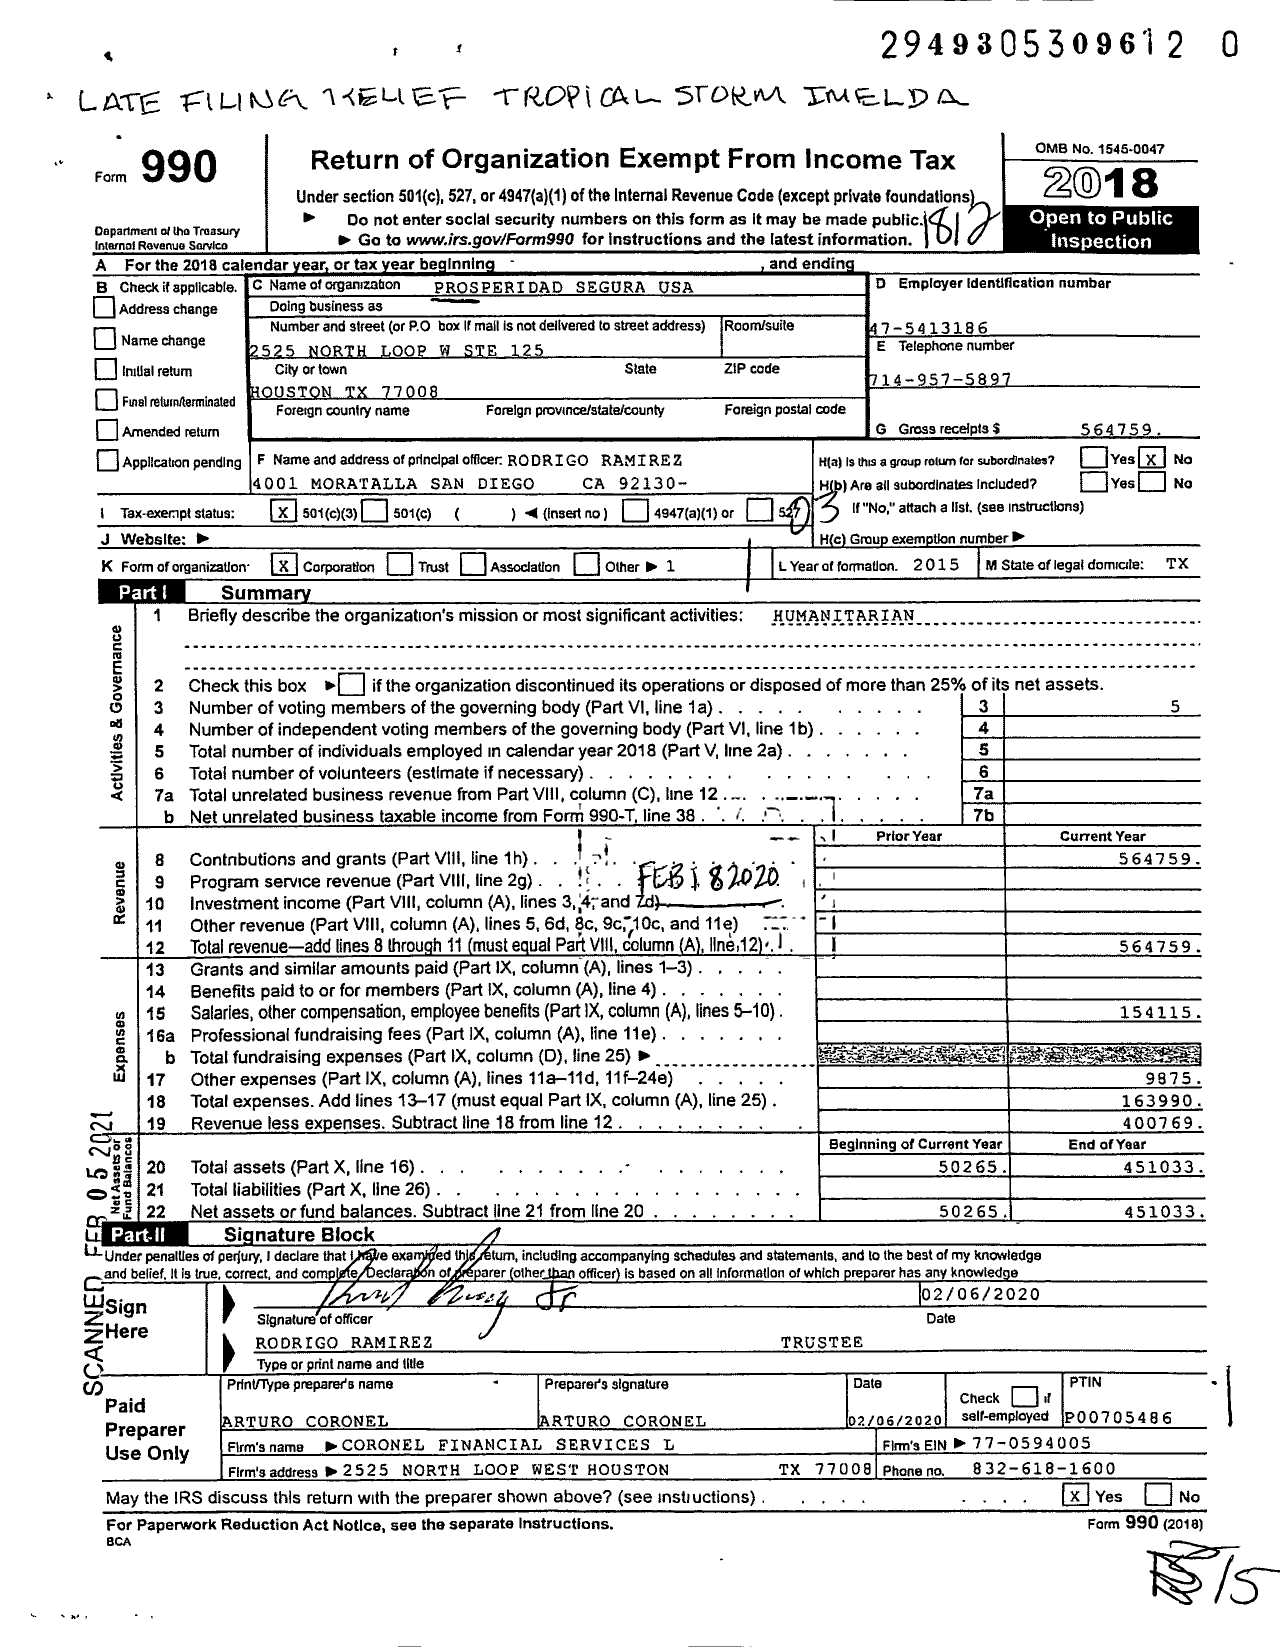 Image of first page of 2018 Form 990 for Prosperidad Segura USA